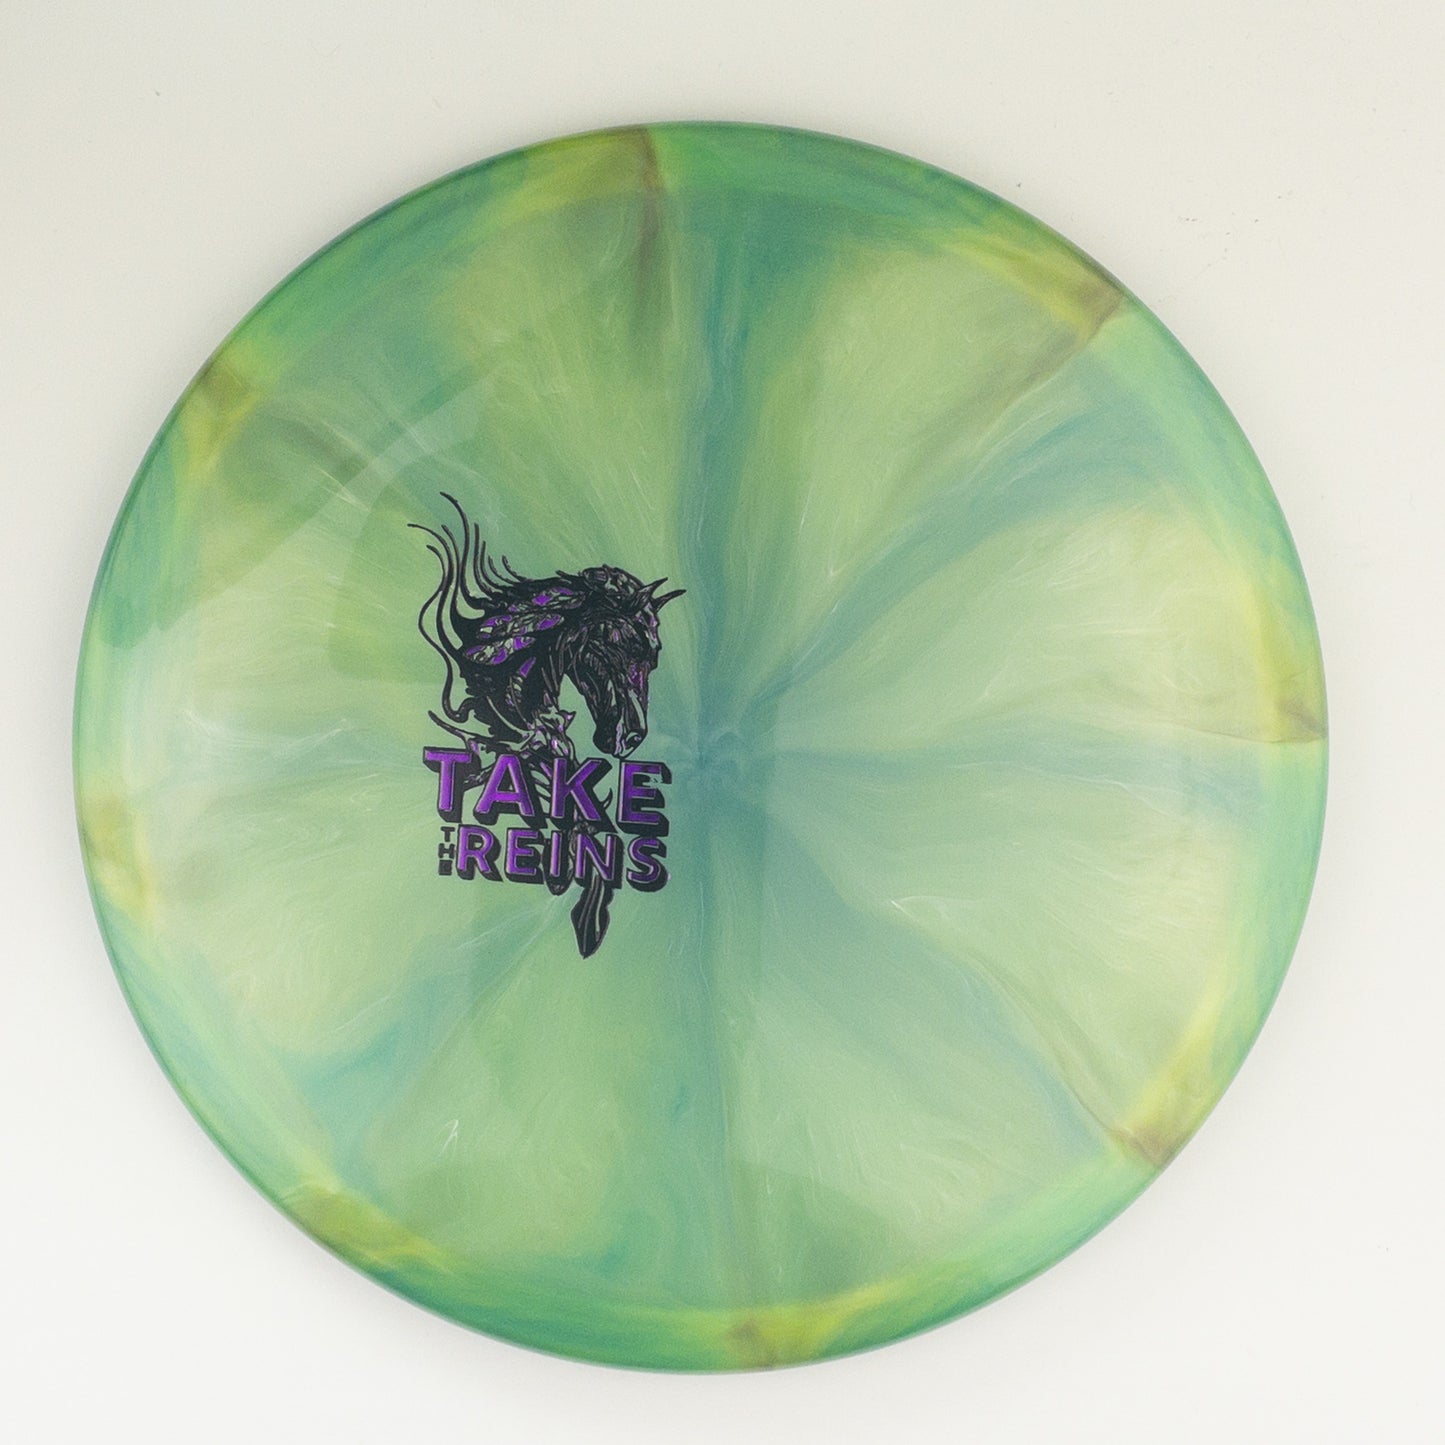 Mint Discs Sublime Swirl Mustang (Take the Reins)